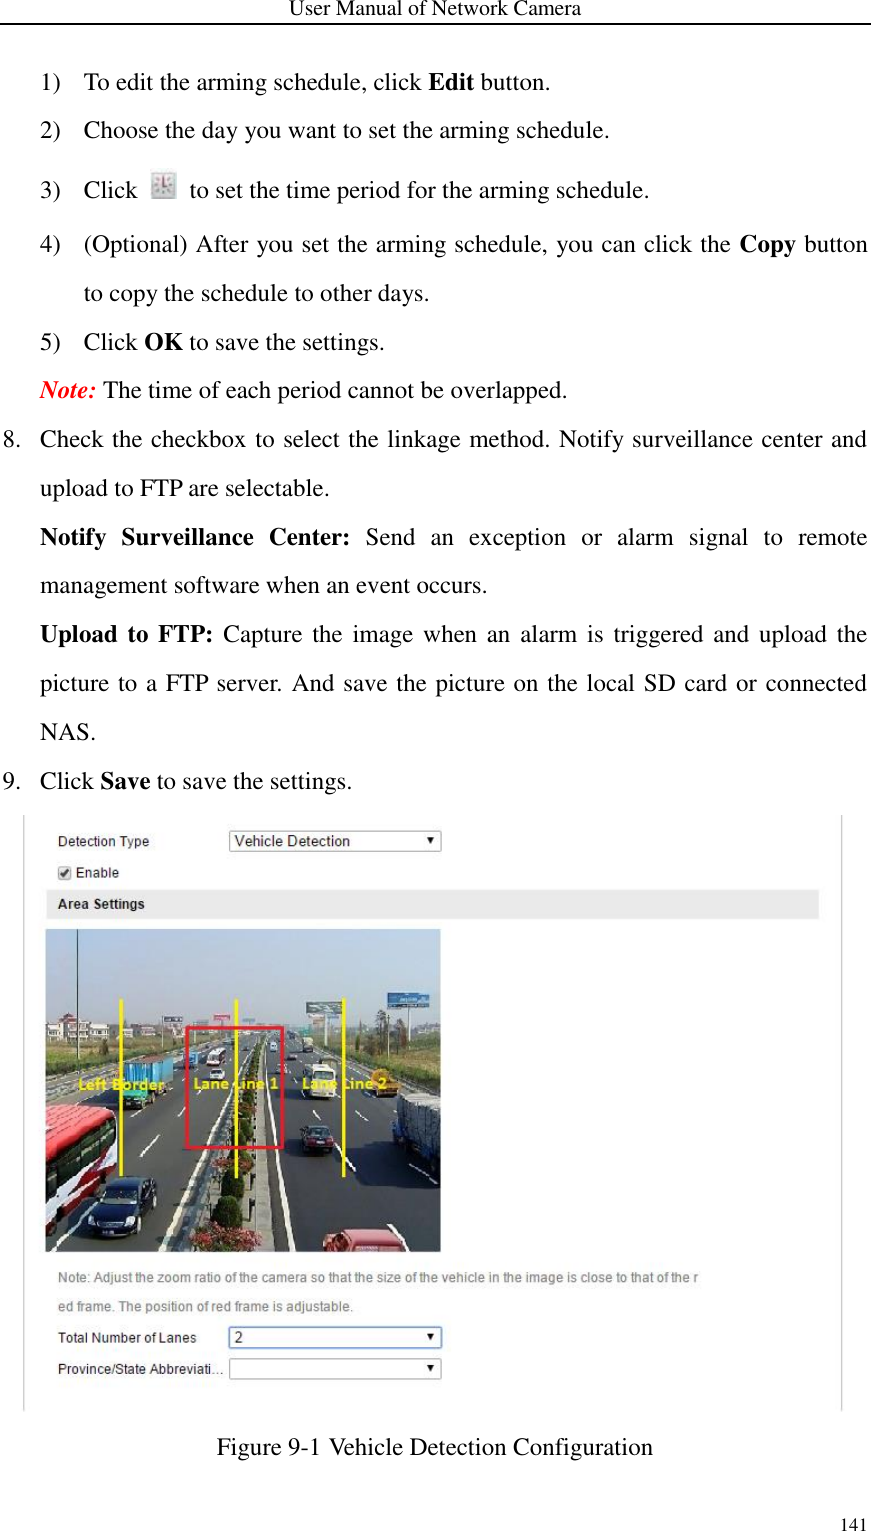 User Manual of Network Camera 141  1) To edit the arming schedule, click Edit button. 2) Choose the day you want to set the arming schedule. 3) Click    to set the time period for the arming schedule. 4) (Optional) After you set the arming schedule, you can click the Copy button to copy the schedule to other days. 5) Click OK to save the settings.   Note: The time of each period cannot be overlapped. 8. Check the checkbox to select the linkage method. Notify surveillance center and upload to FTP are selectable. Notify  Surveillance  Center:  Send  an  exception  or  alarm  signal  to  remote management software when an event occurs.   Upload to FTP: Capture the image when an  alarm is triggered and upload the picture to a FTP server. And save the picture on the local SD card or connected NAS.   9. Click Save to save the settings.  Figure 9-1 Vehicle Detection Configuration  